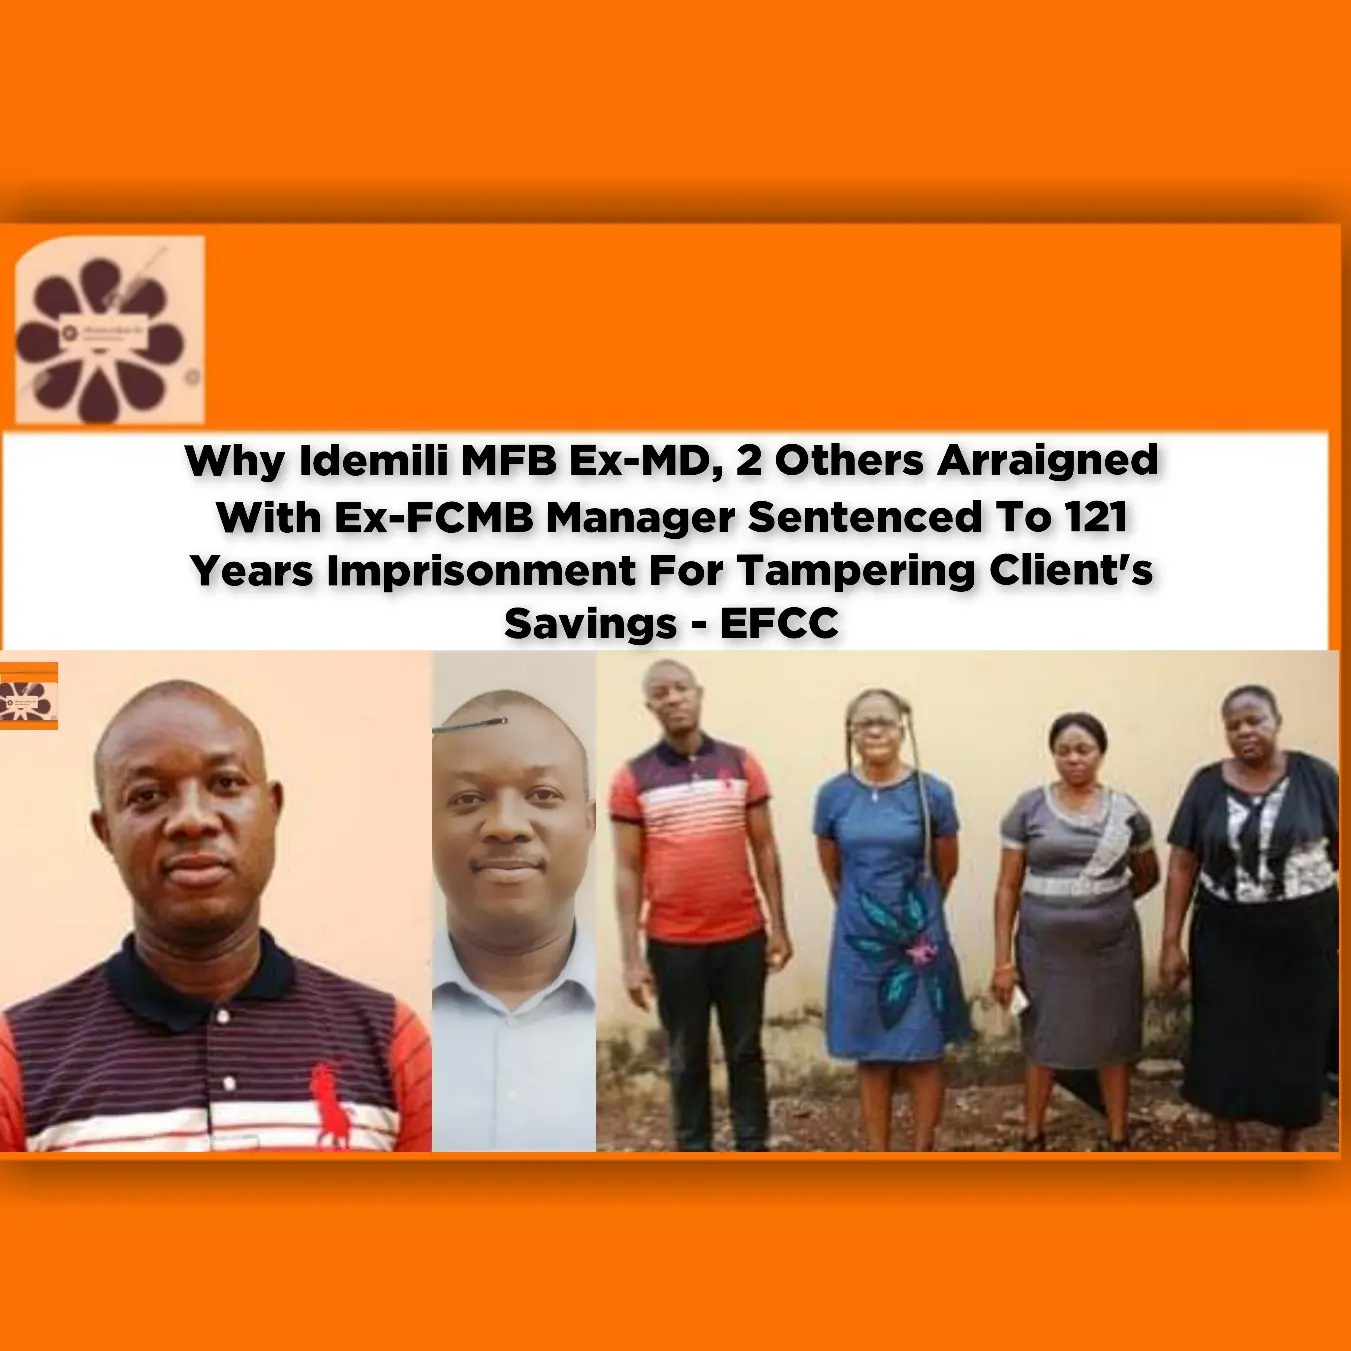 Why Idemili MFB Ex-MD, 2 Others Arraigned With Ex-FCMB Manager Sentenced To 121 Years Imprisonment For Tampering Client's Savings - EFCC ~ OsazuwaAkonedo #Daniel